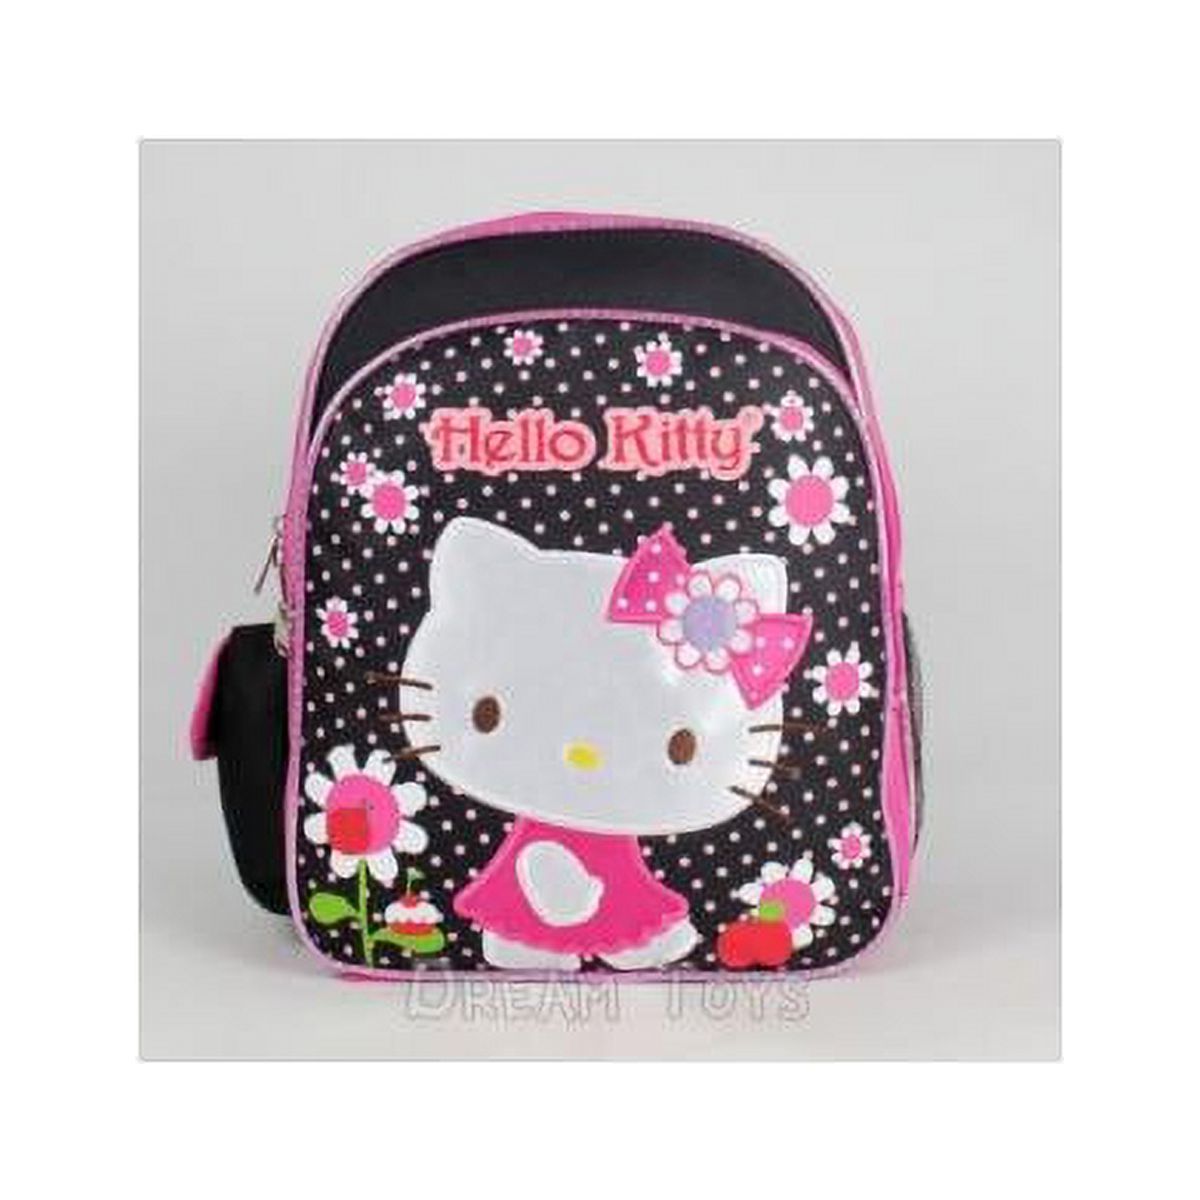 Hello Kitty Girl's Flowers Black/Pink 12 Backpack 05313 - image 1 of 2